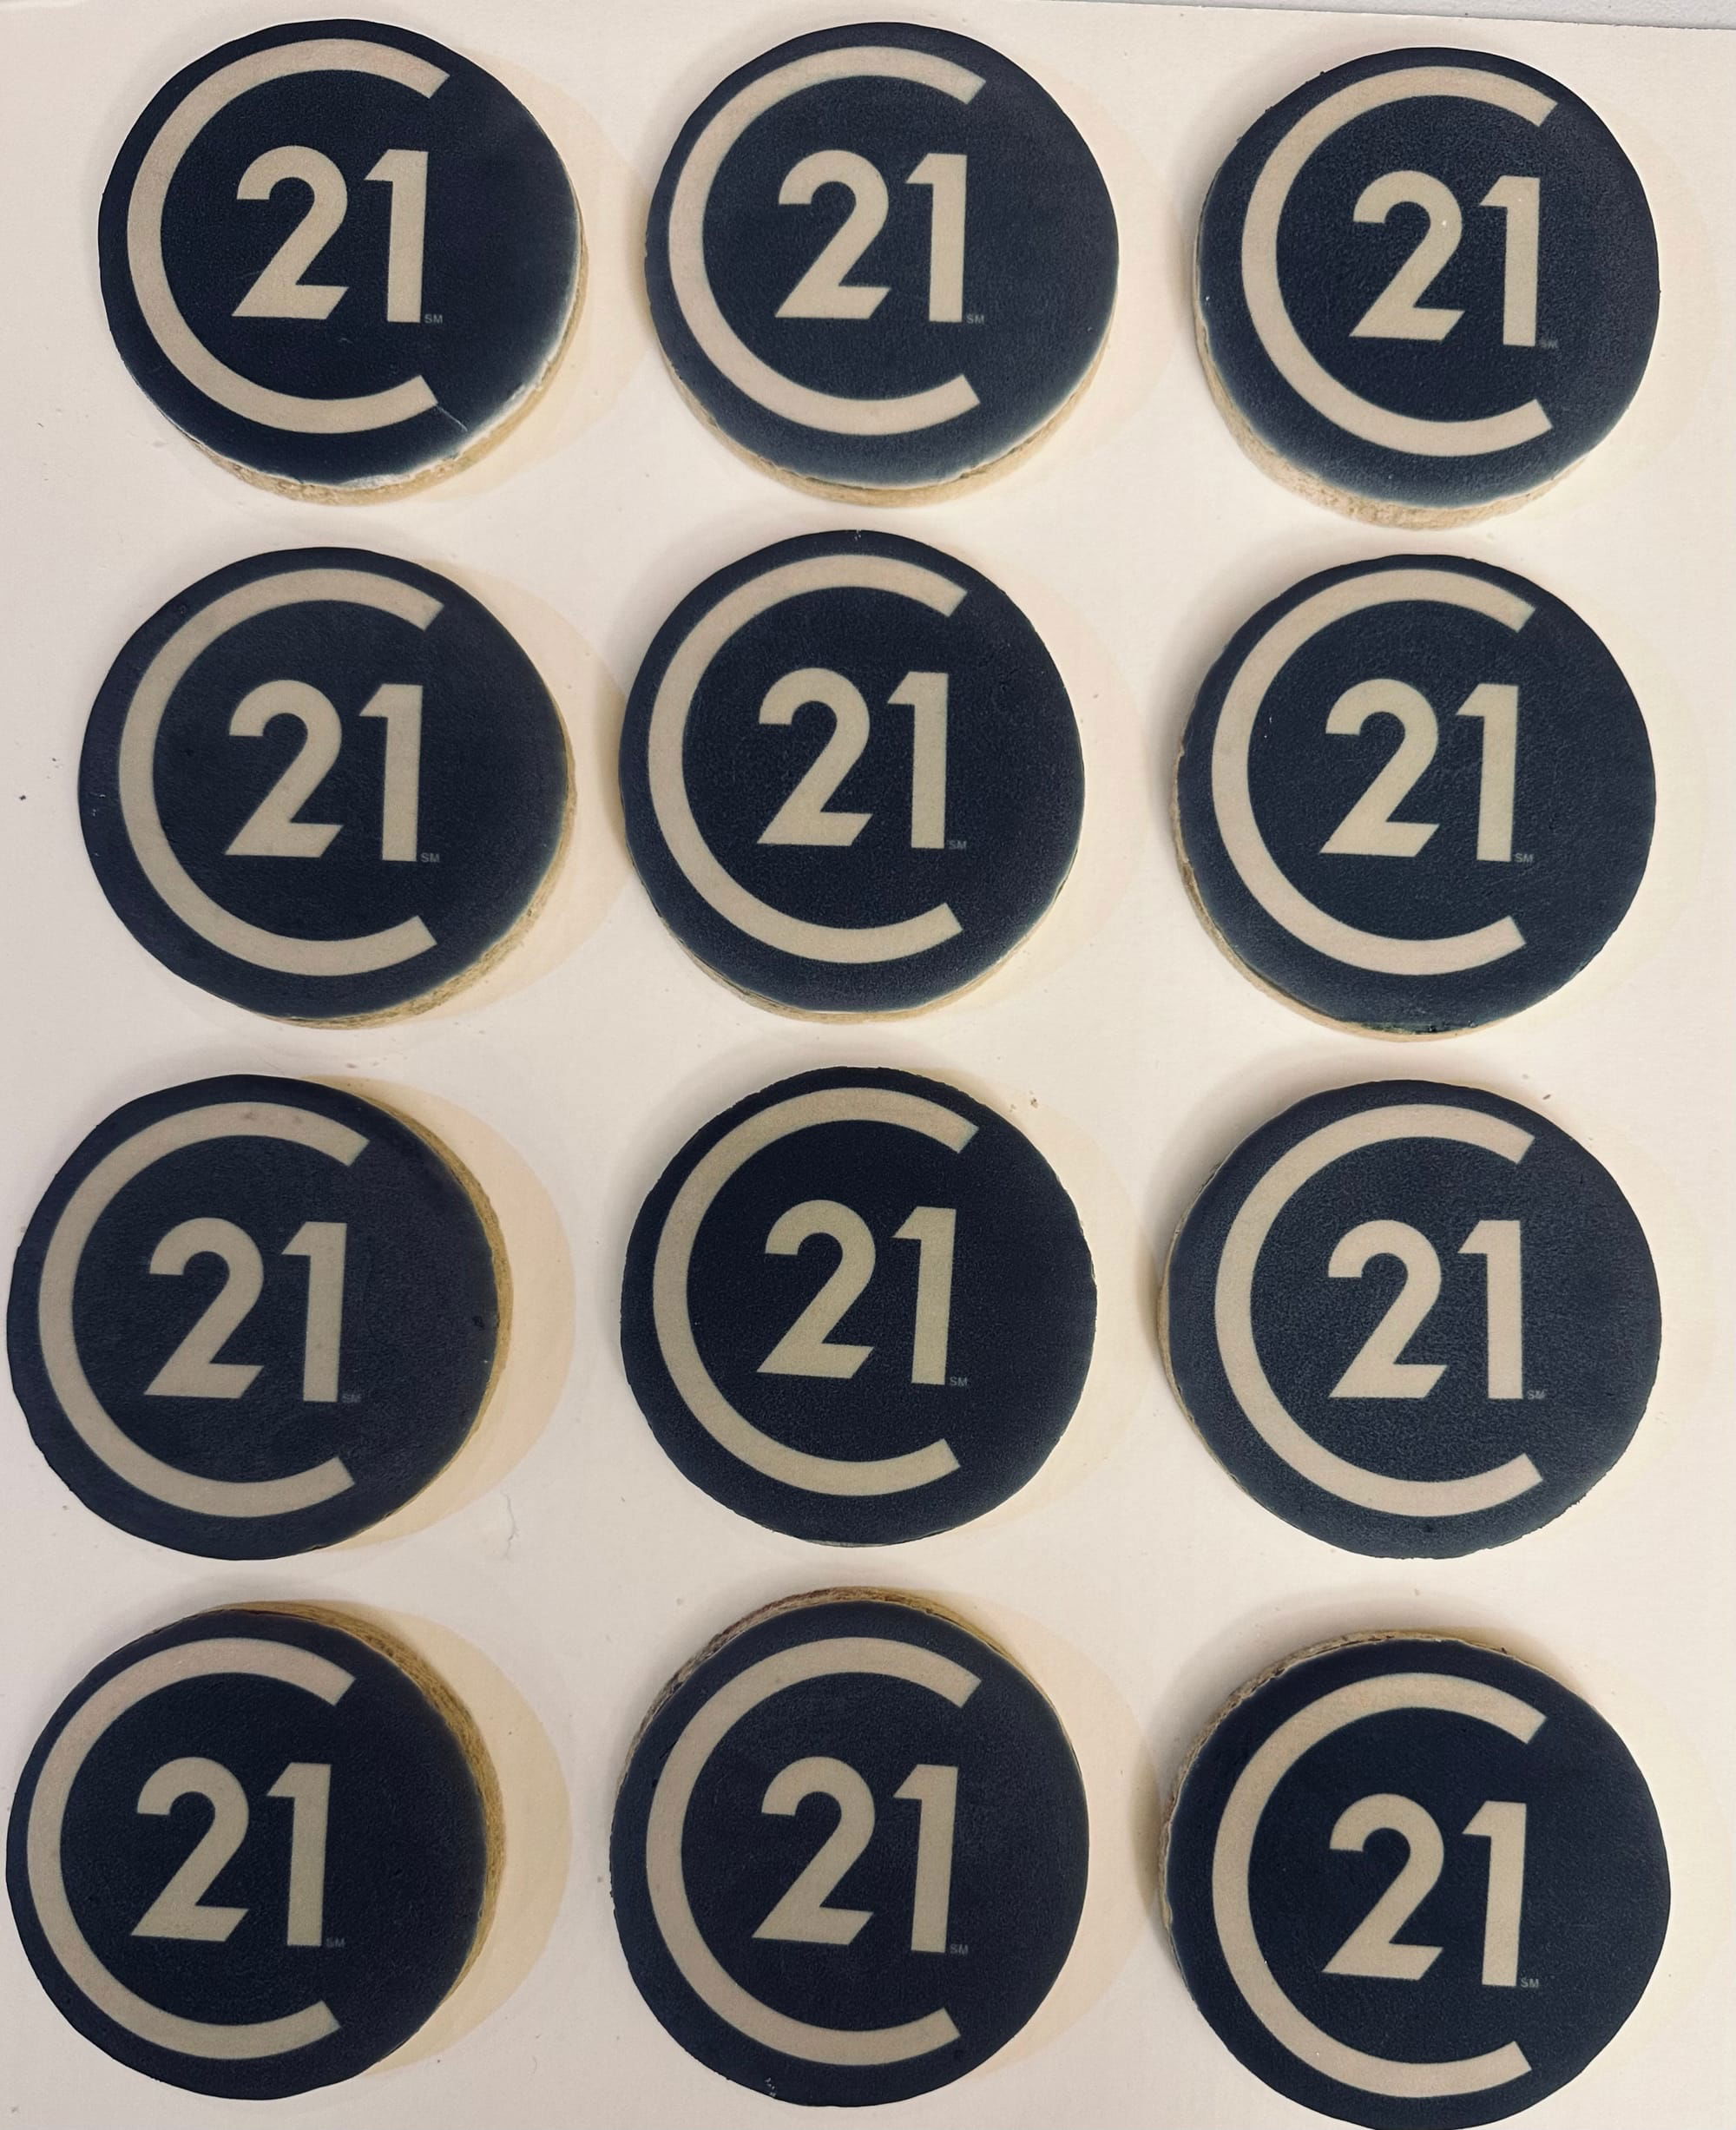 Company Logo Royal Icing Sugar Cookies with Images